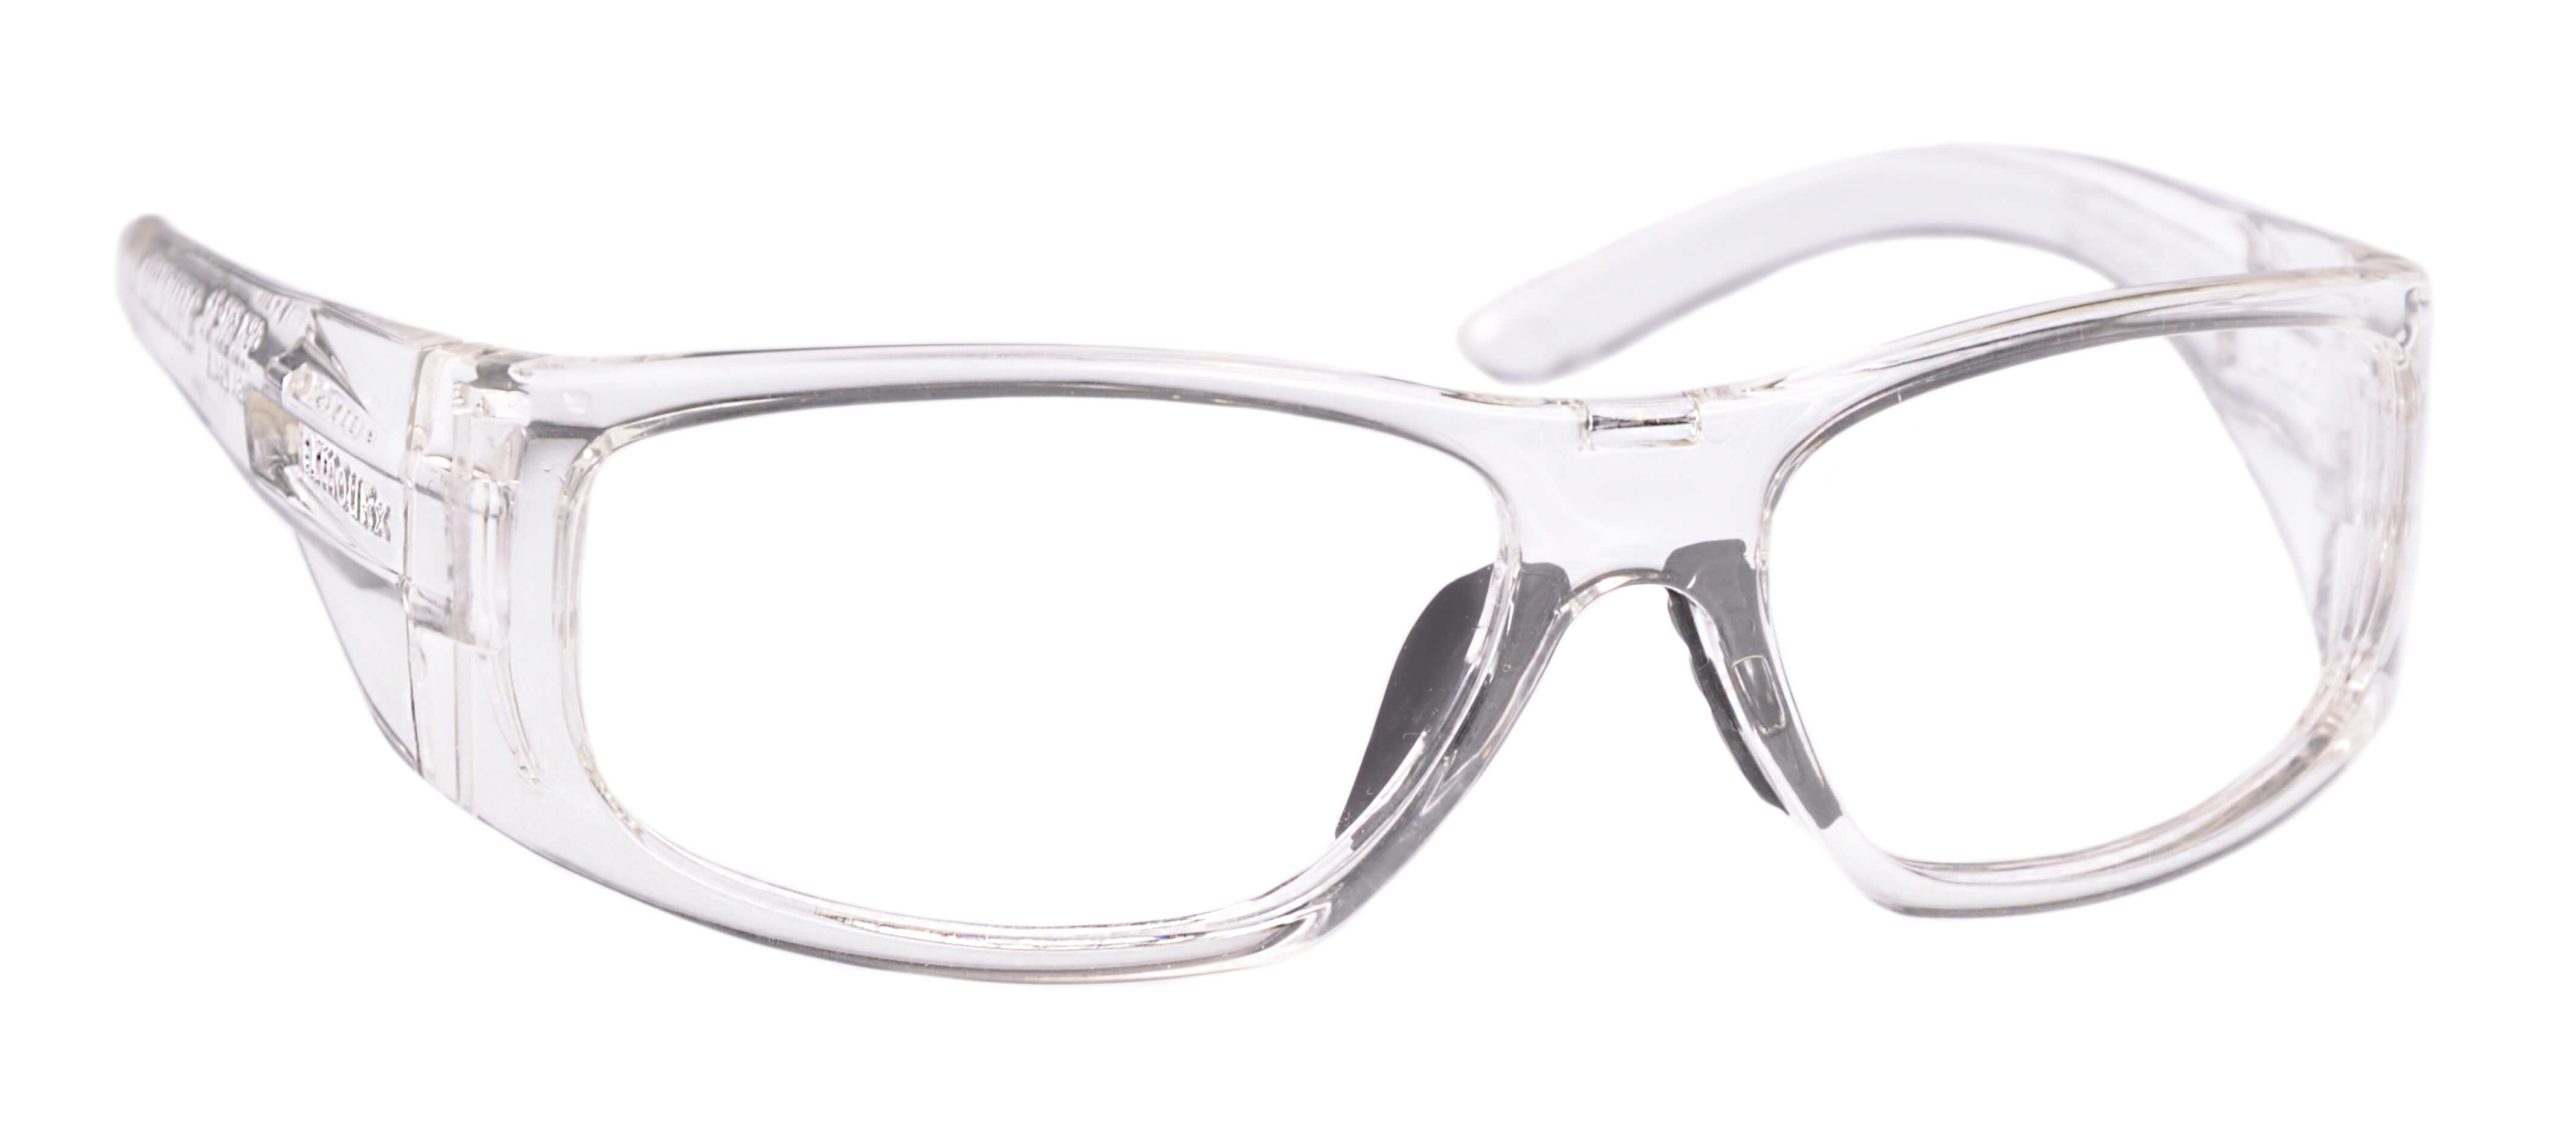 Safety glasses frames WRAP-RX COLLECTION: MODEL 6001 in Crystal